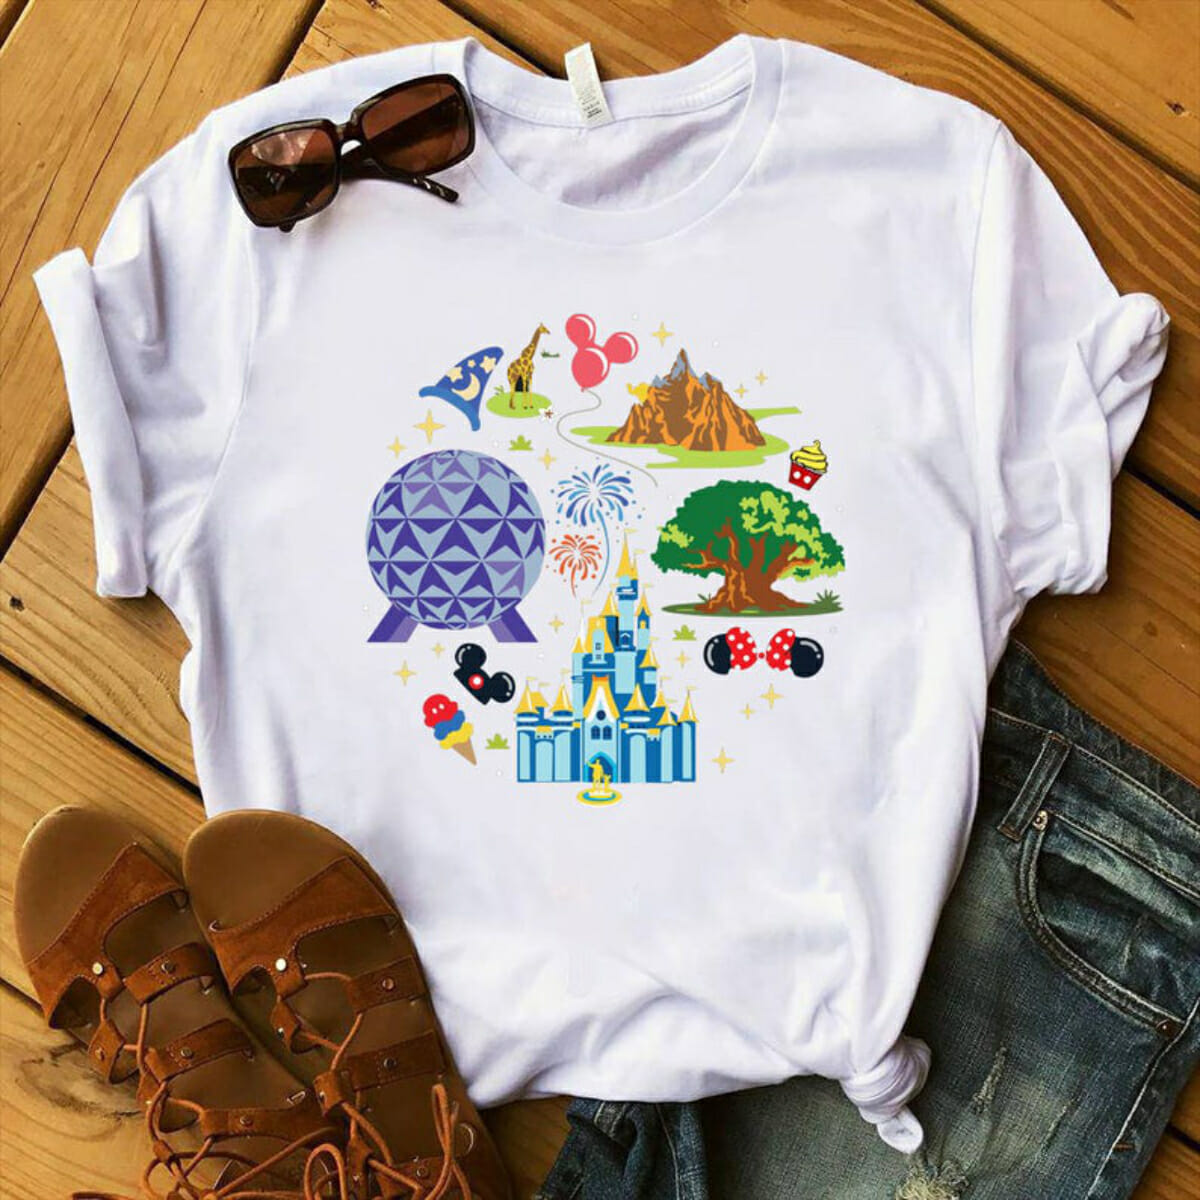 23+ Best Disney World Shirts to Wear to the Parks AllAmerican Atlas